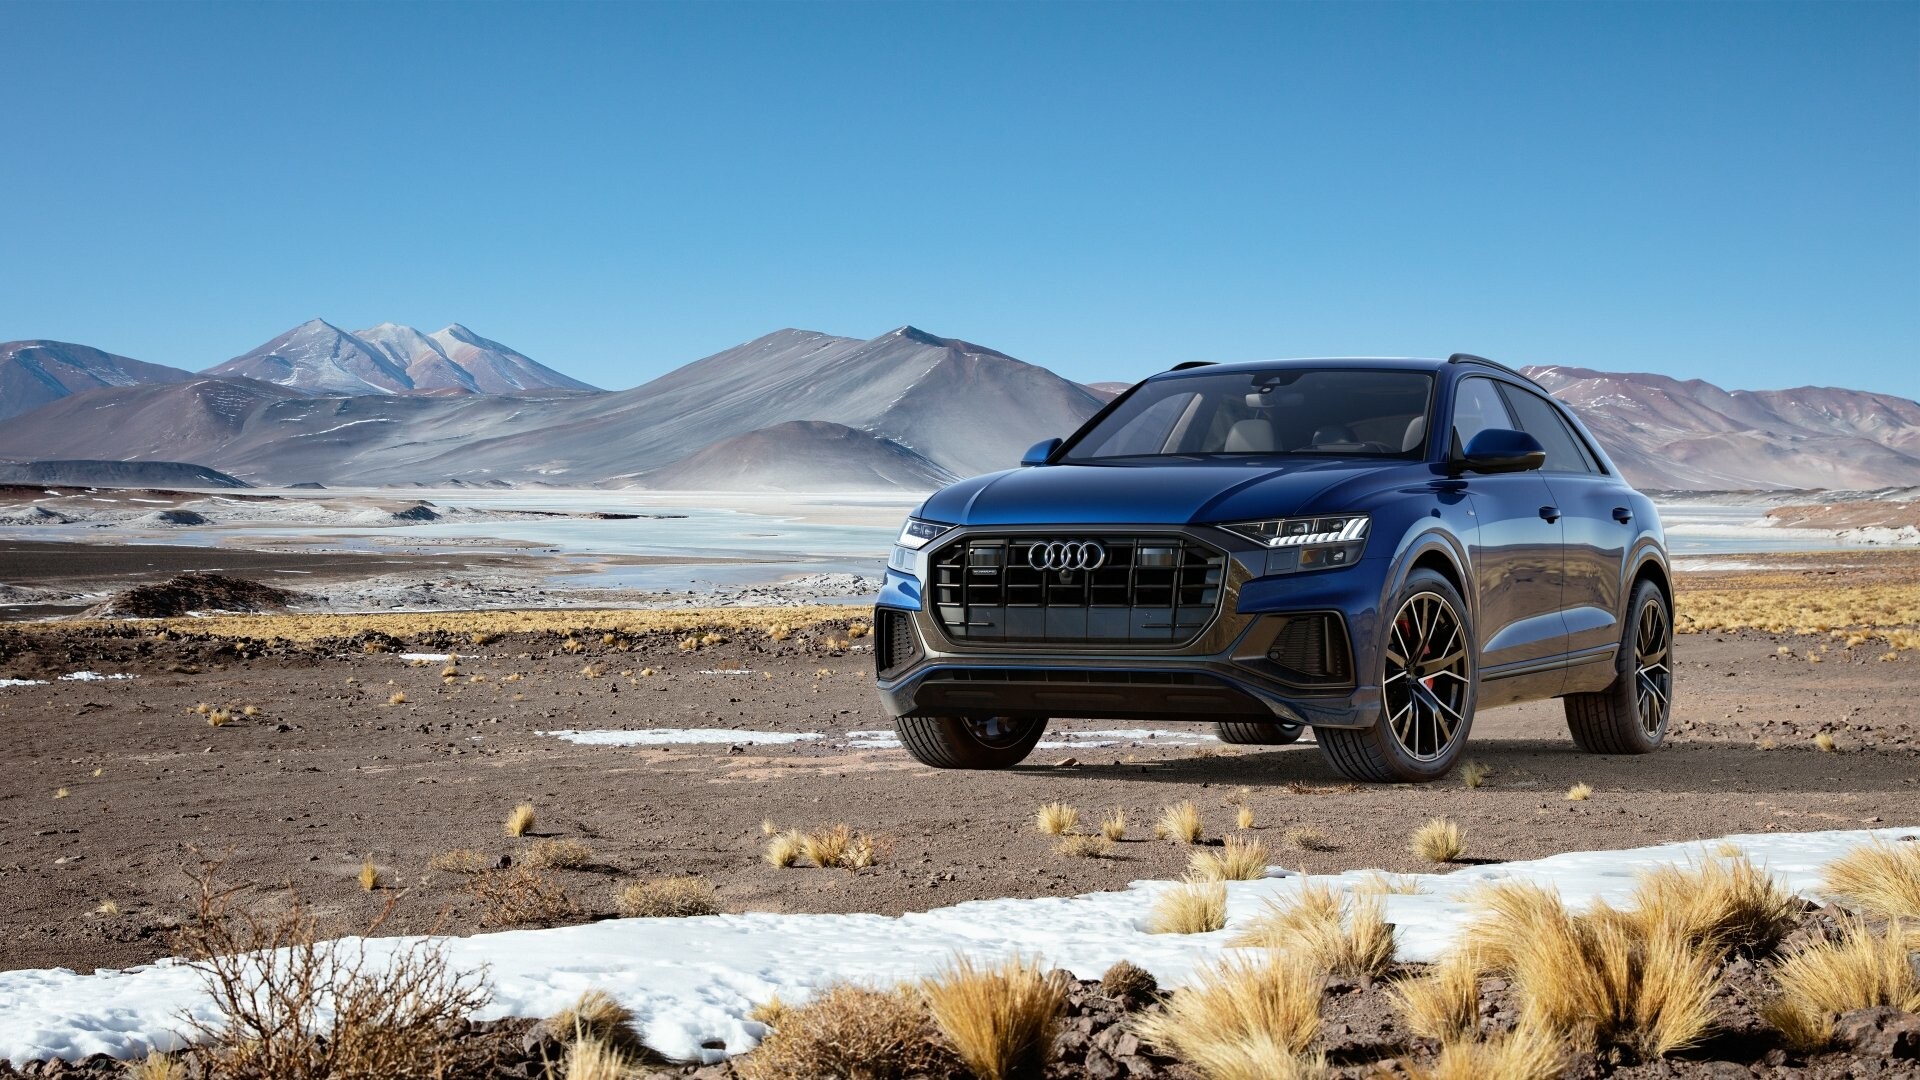 Audi: Majority owned by Volkswagen for more than 40 years, Q8, SUV. 1920x1080 Full HD Wallpaper.